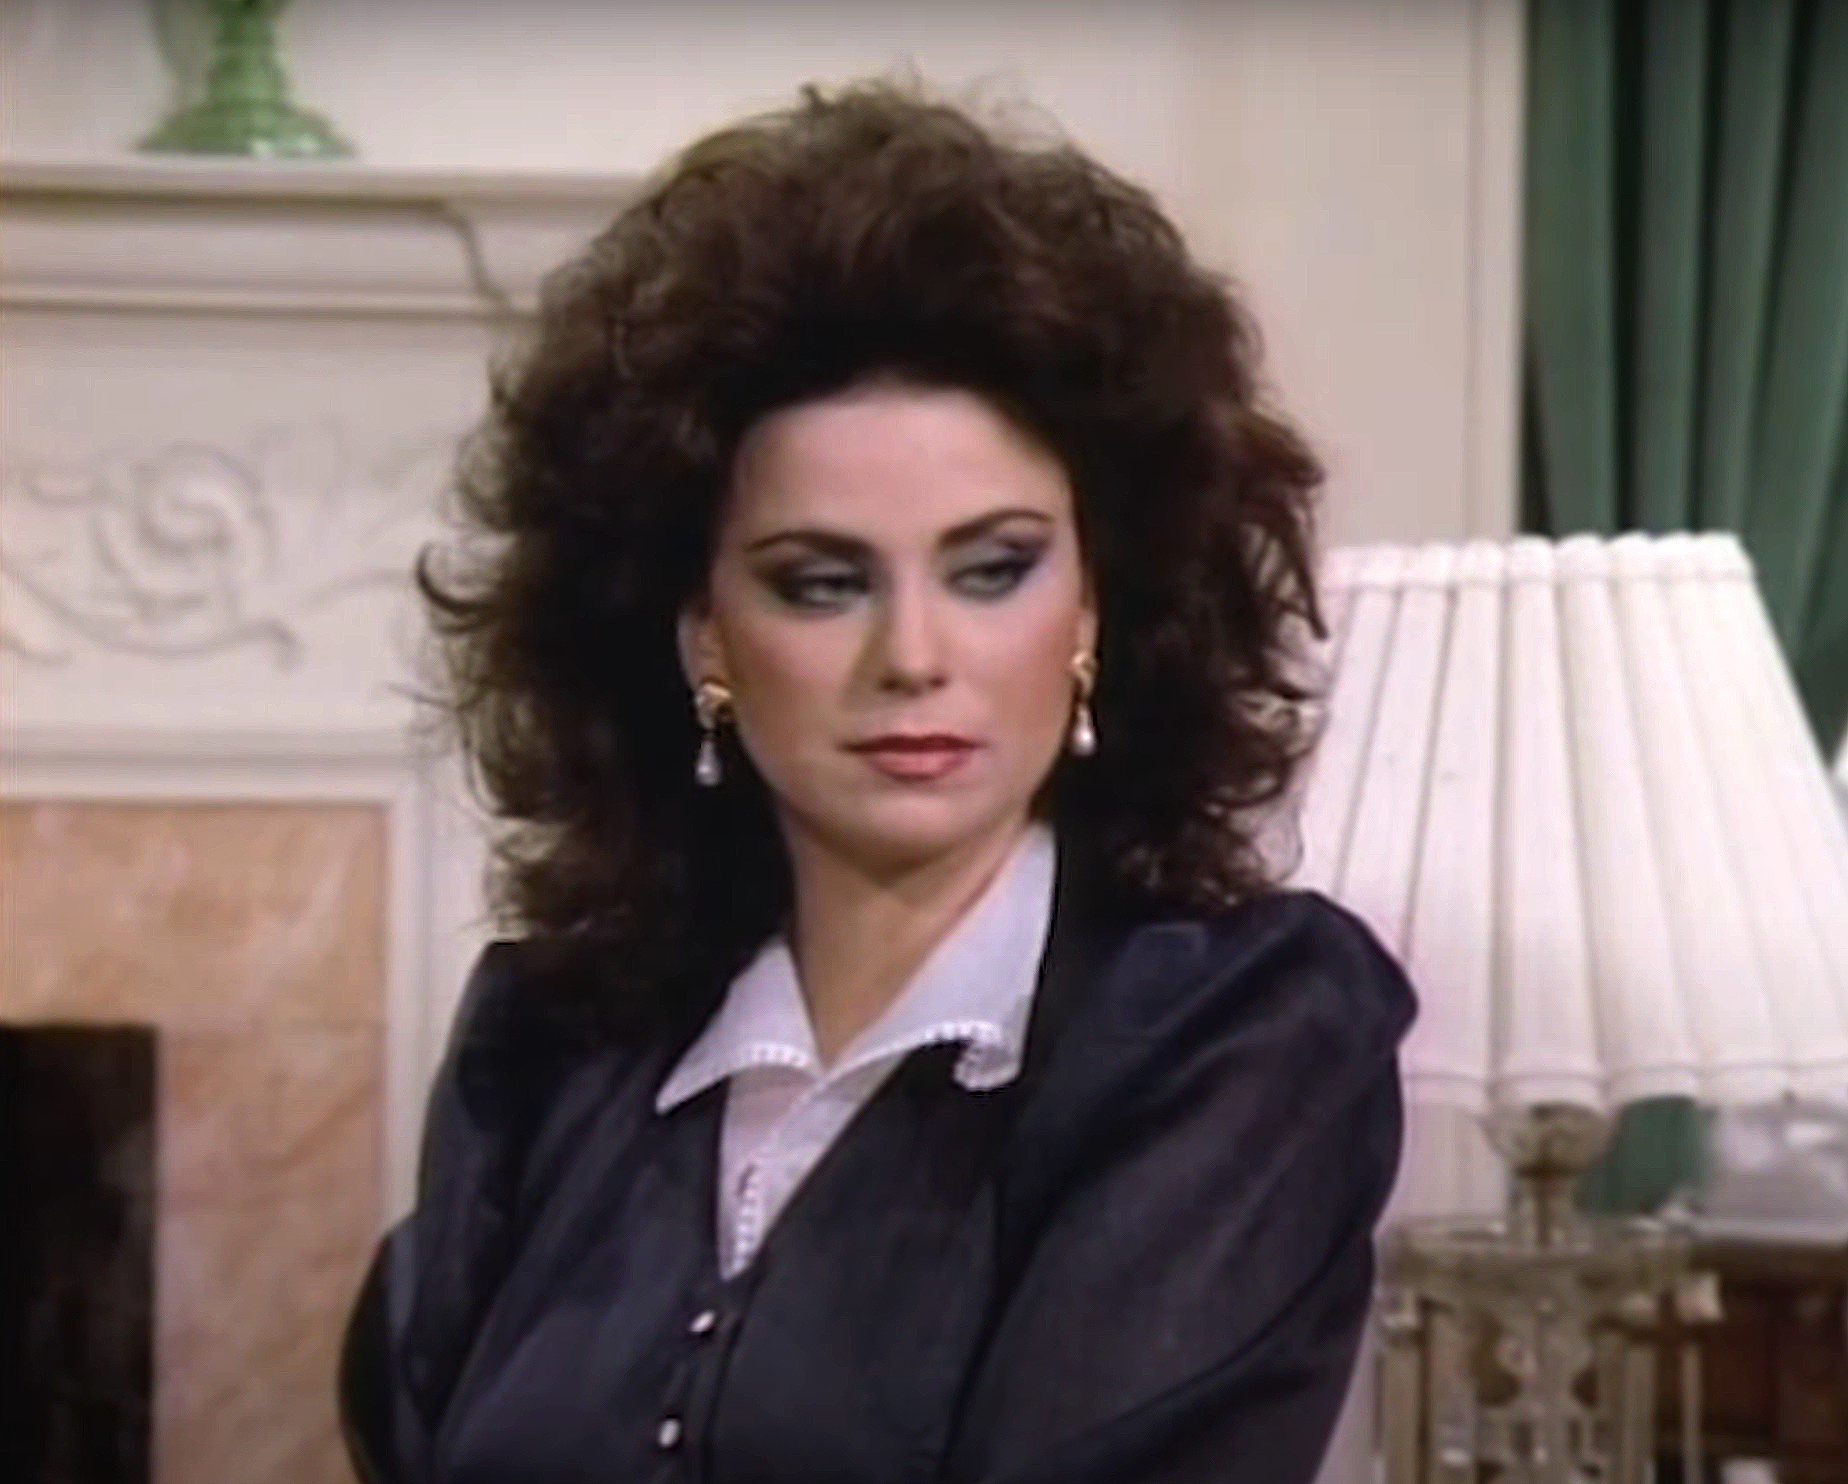 Designing Women s Delta Burke Was a Goddess When Using Meth to Lose Weight